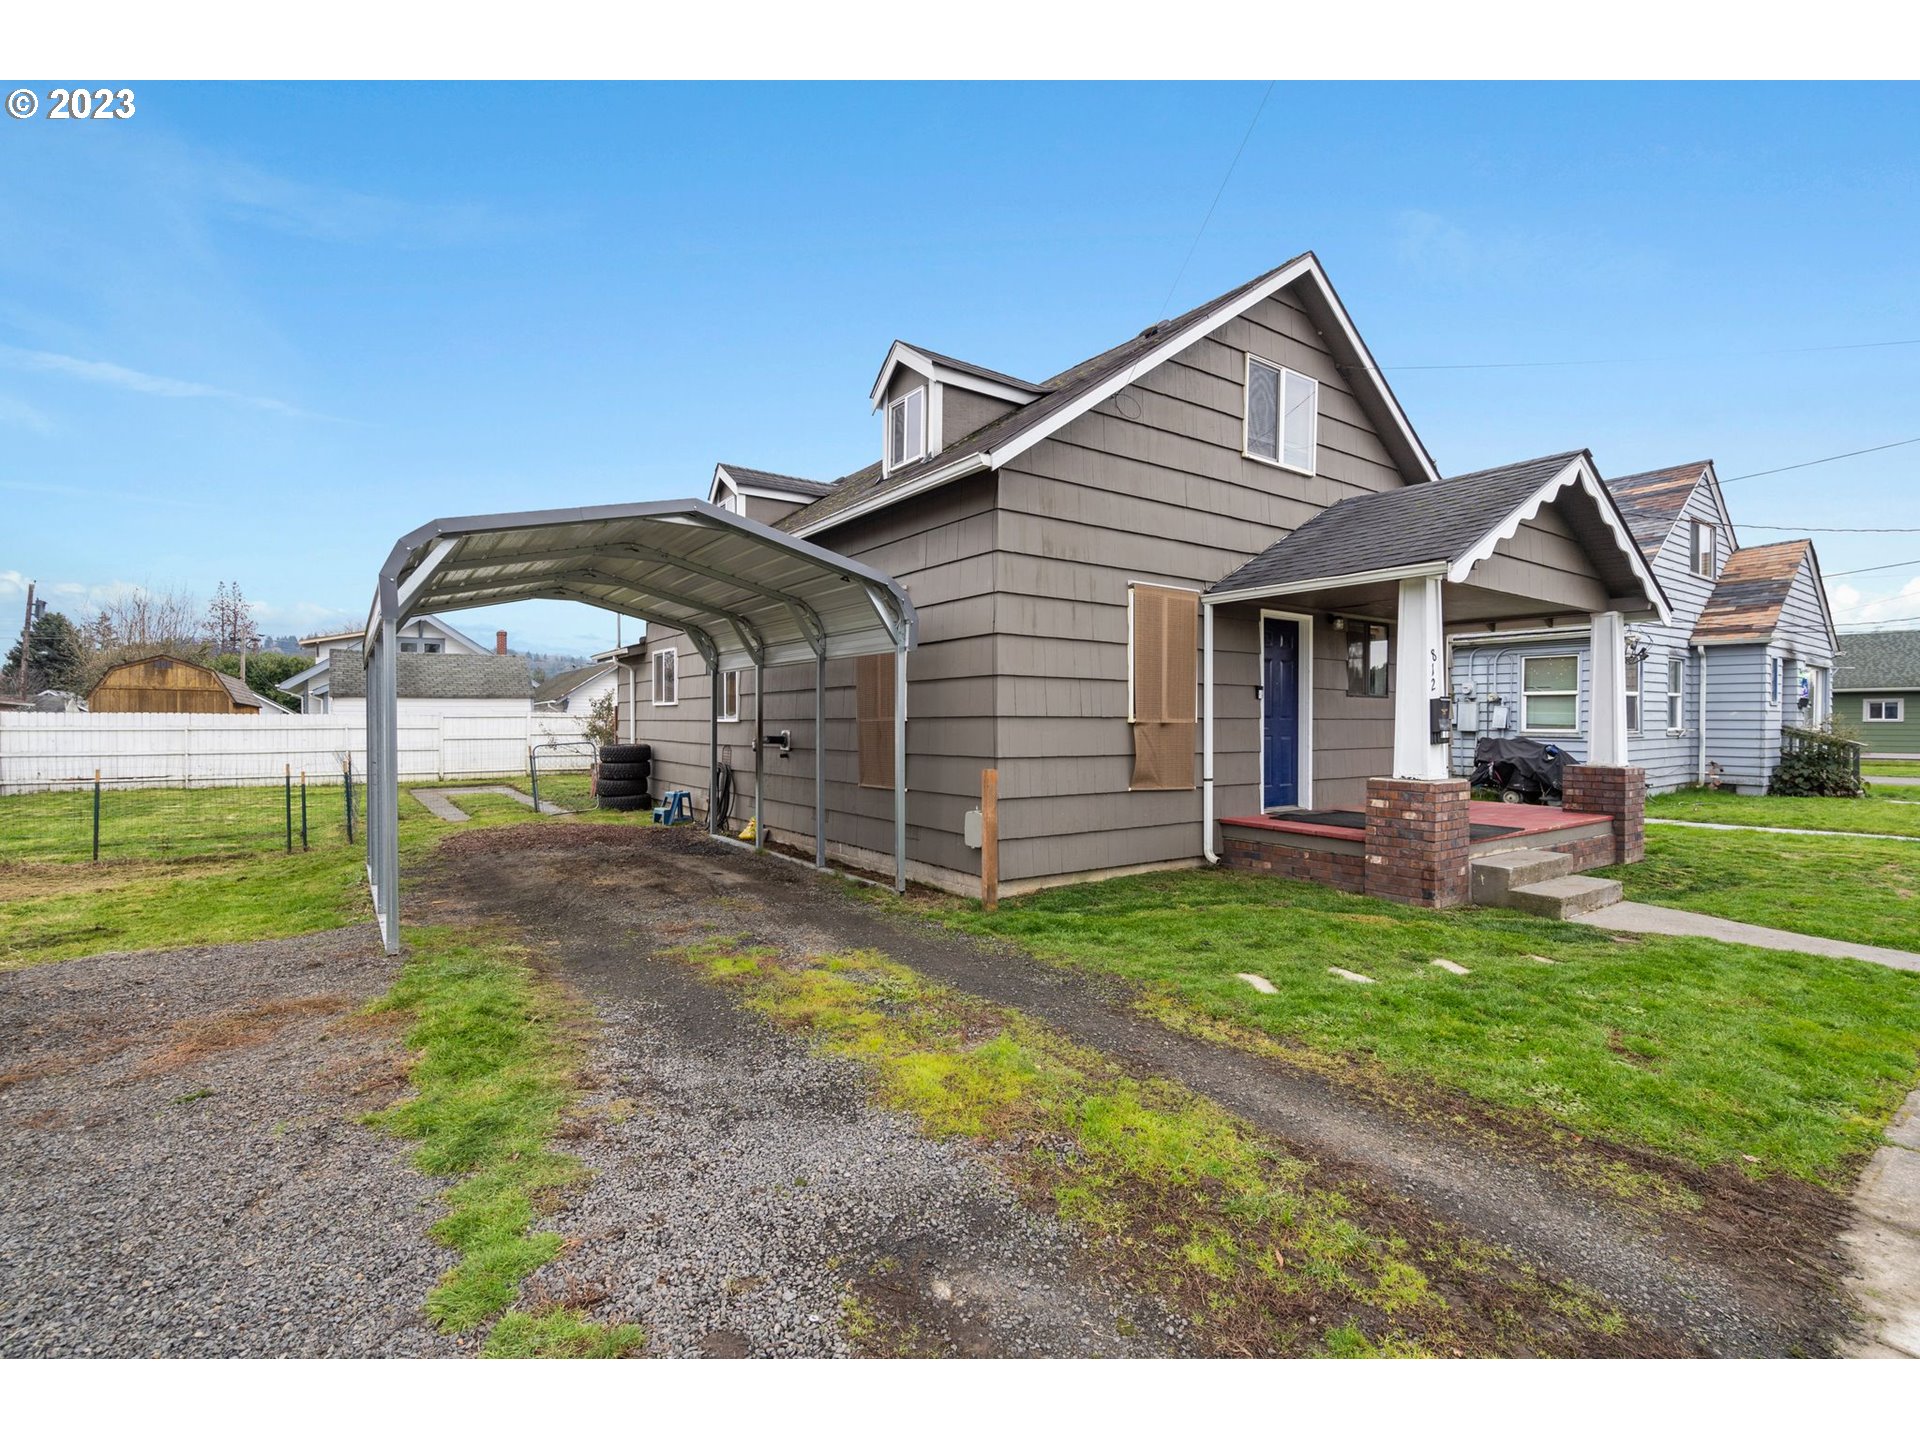 812 S 5th Ave, Kelso, WA 98626